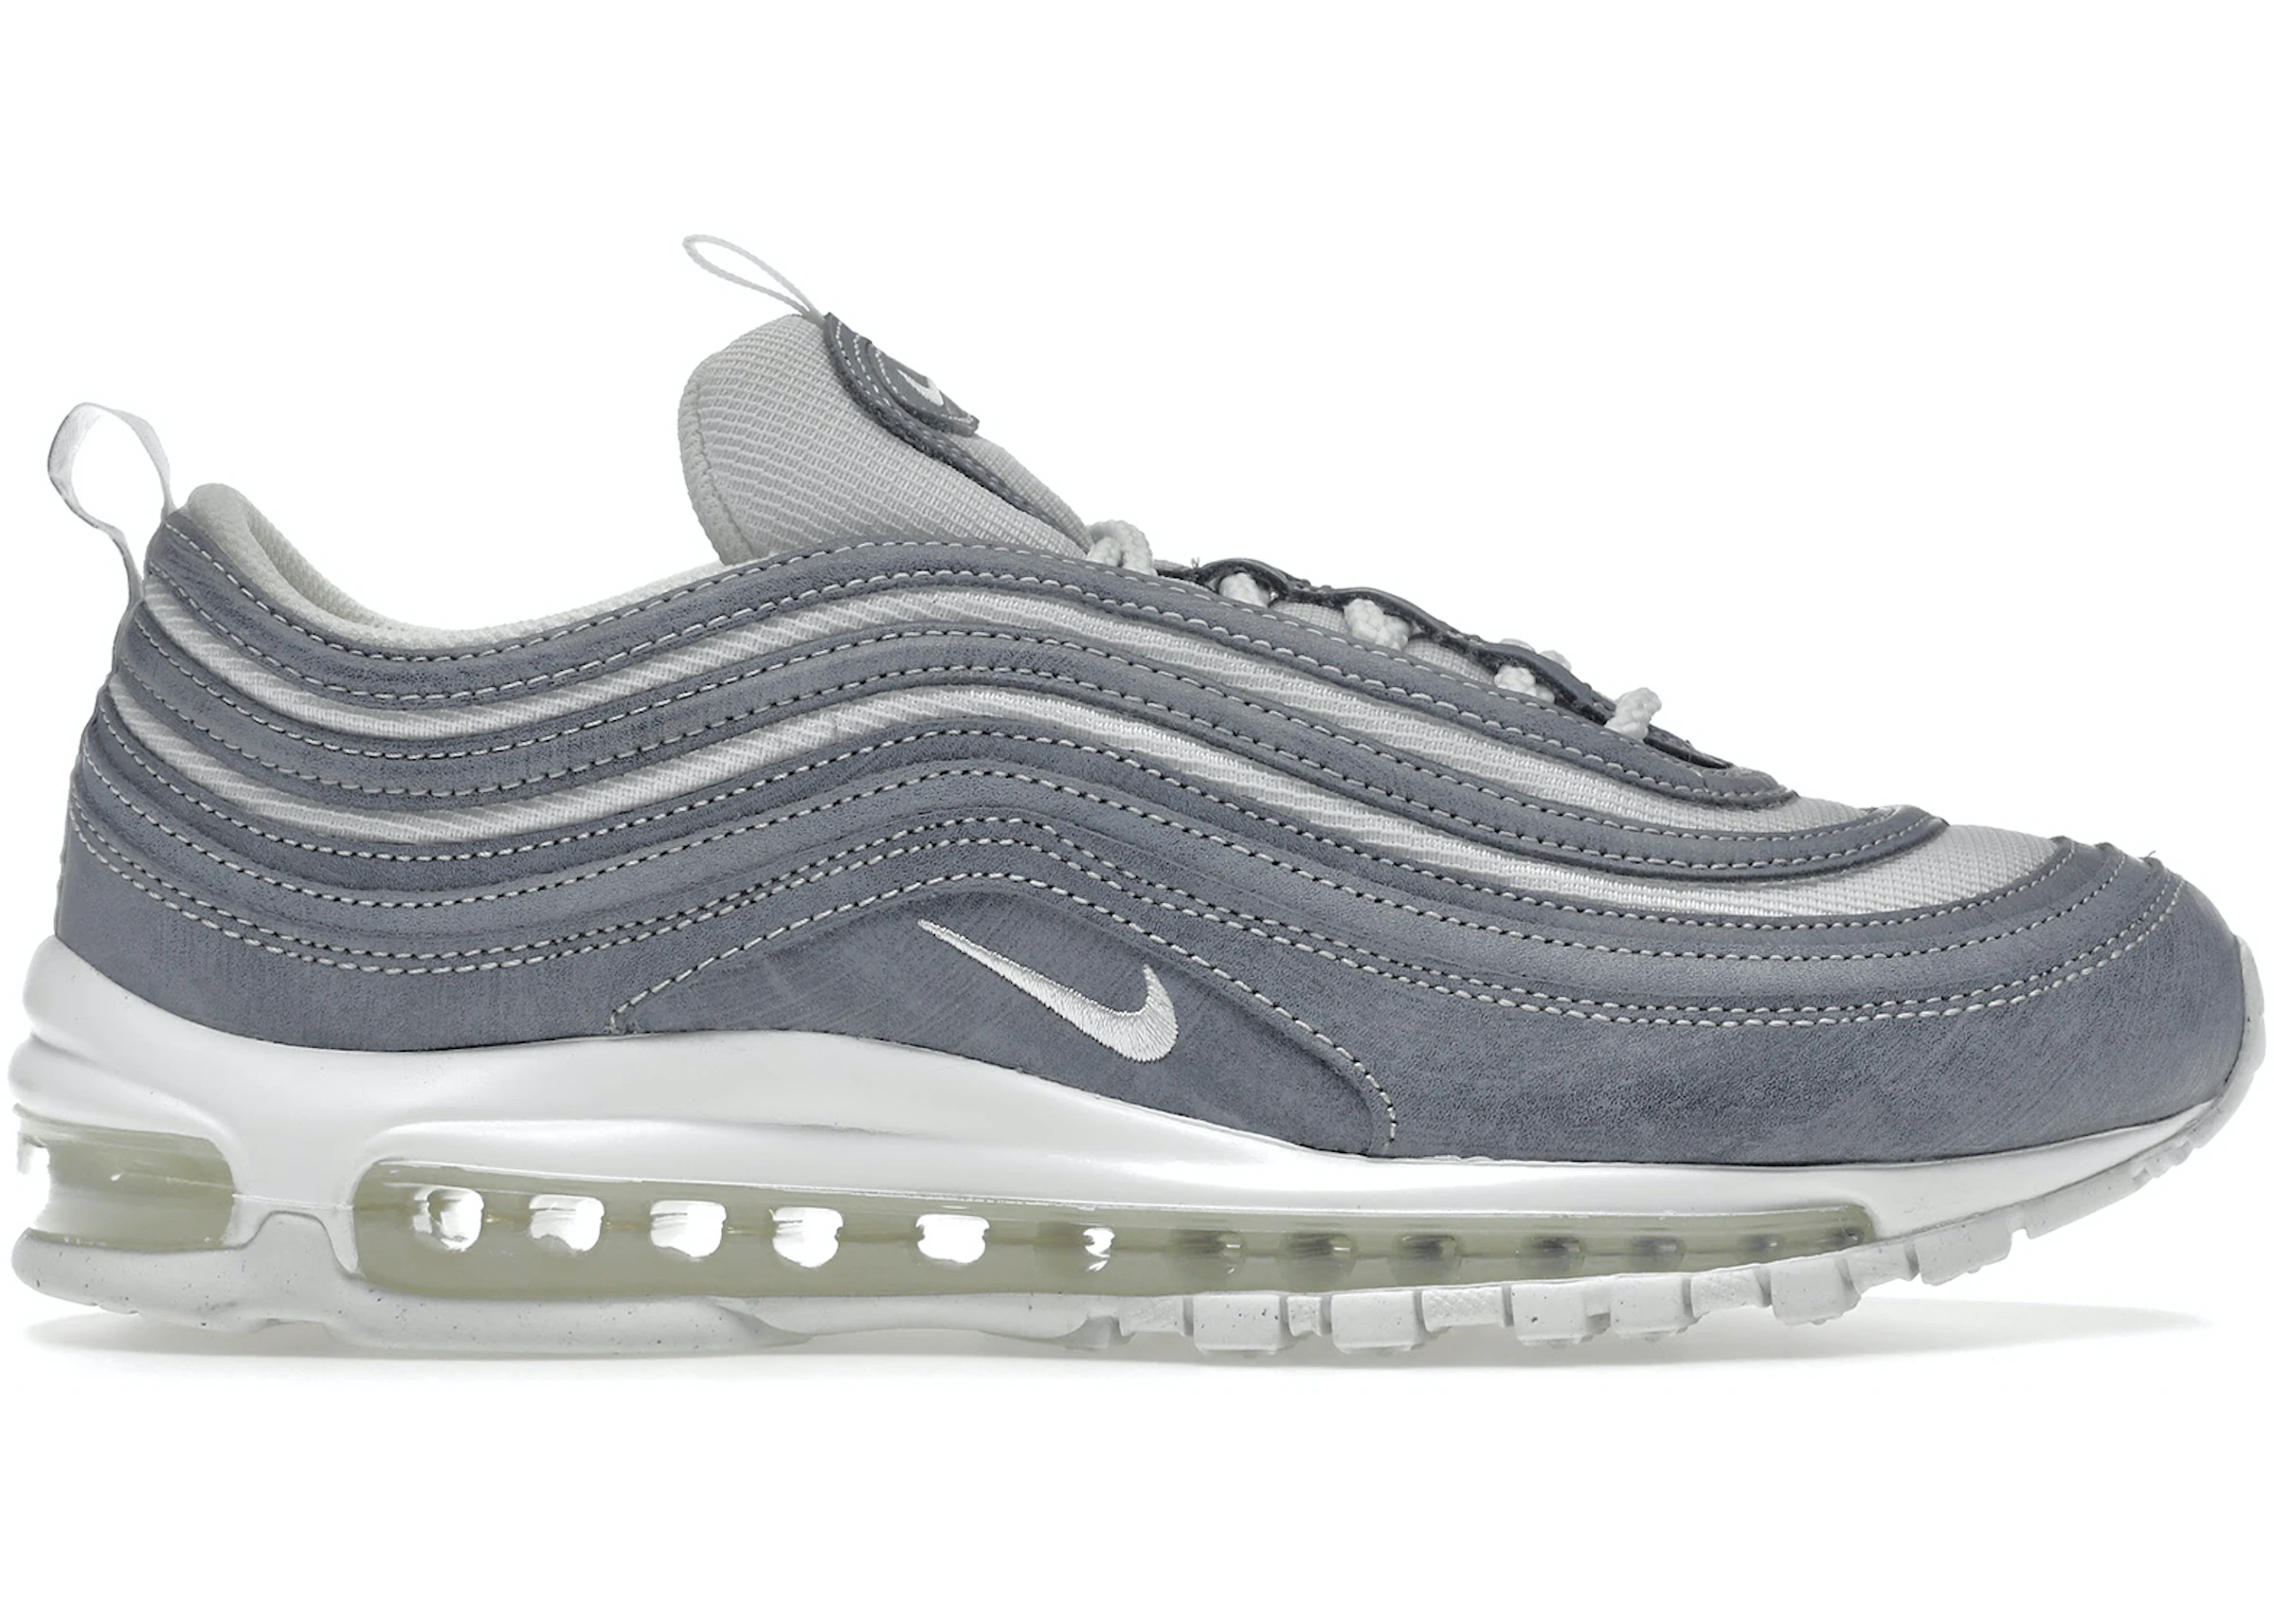 equal it's beautiful Albany Nike Air Max 97 Sneakers - StockX